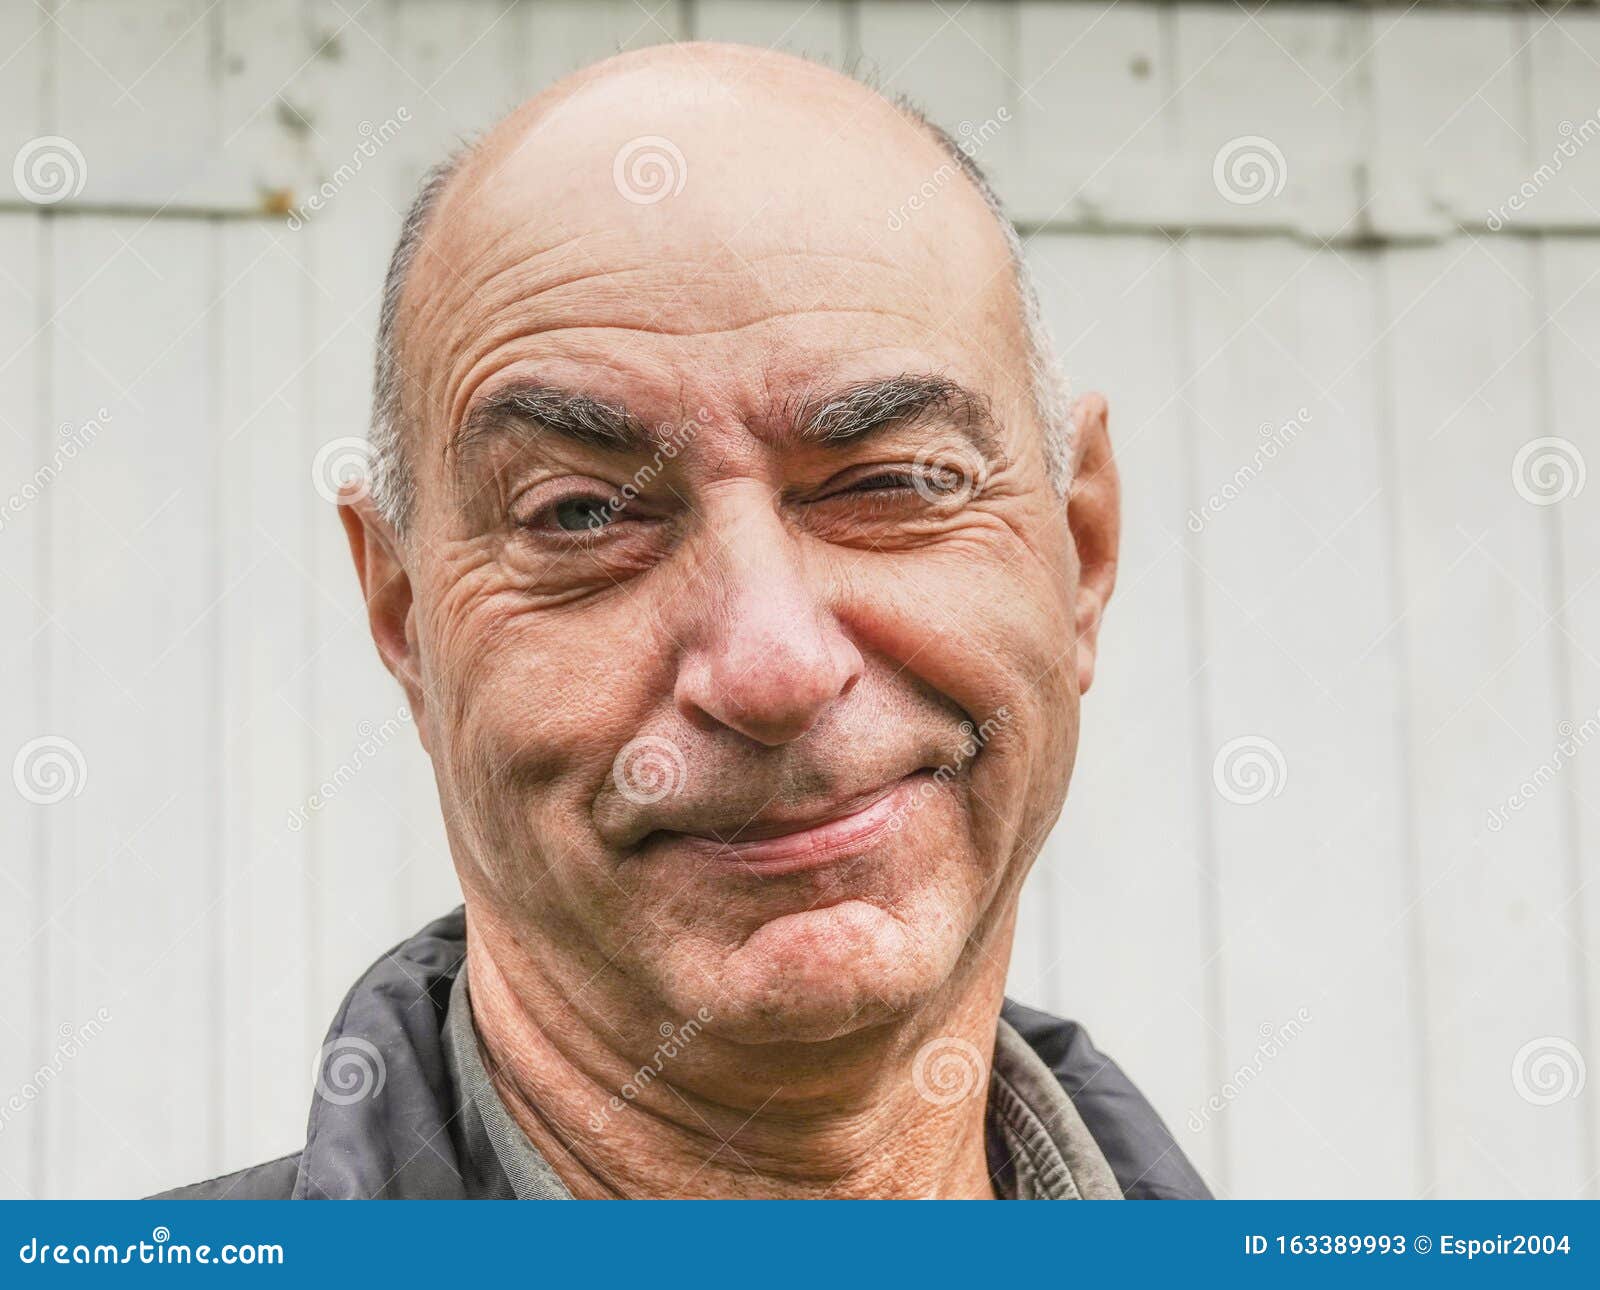 Senior Male with Funny Faces Stock Image - Image of appearance, elder:  163389993